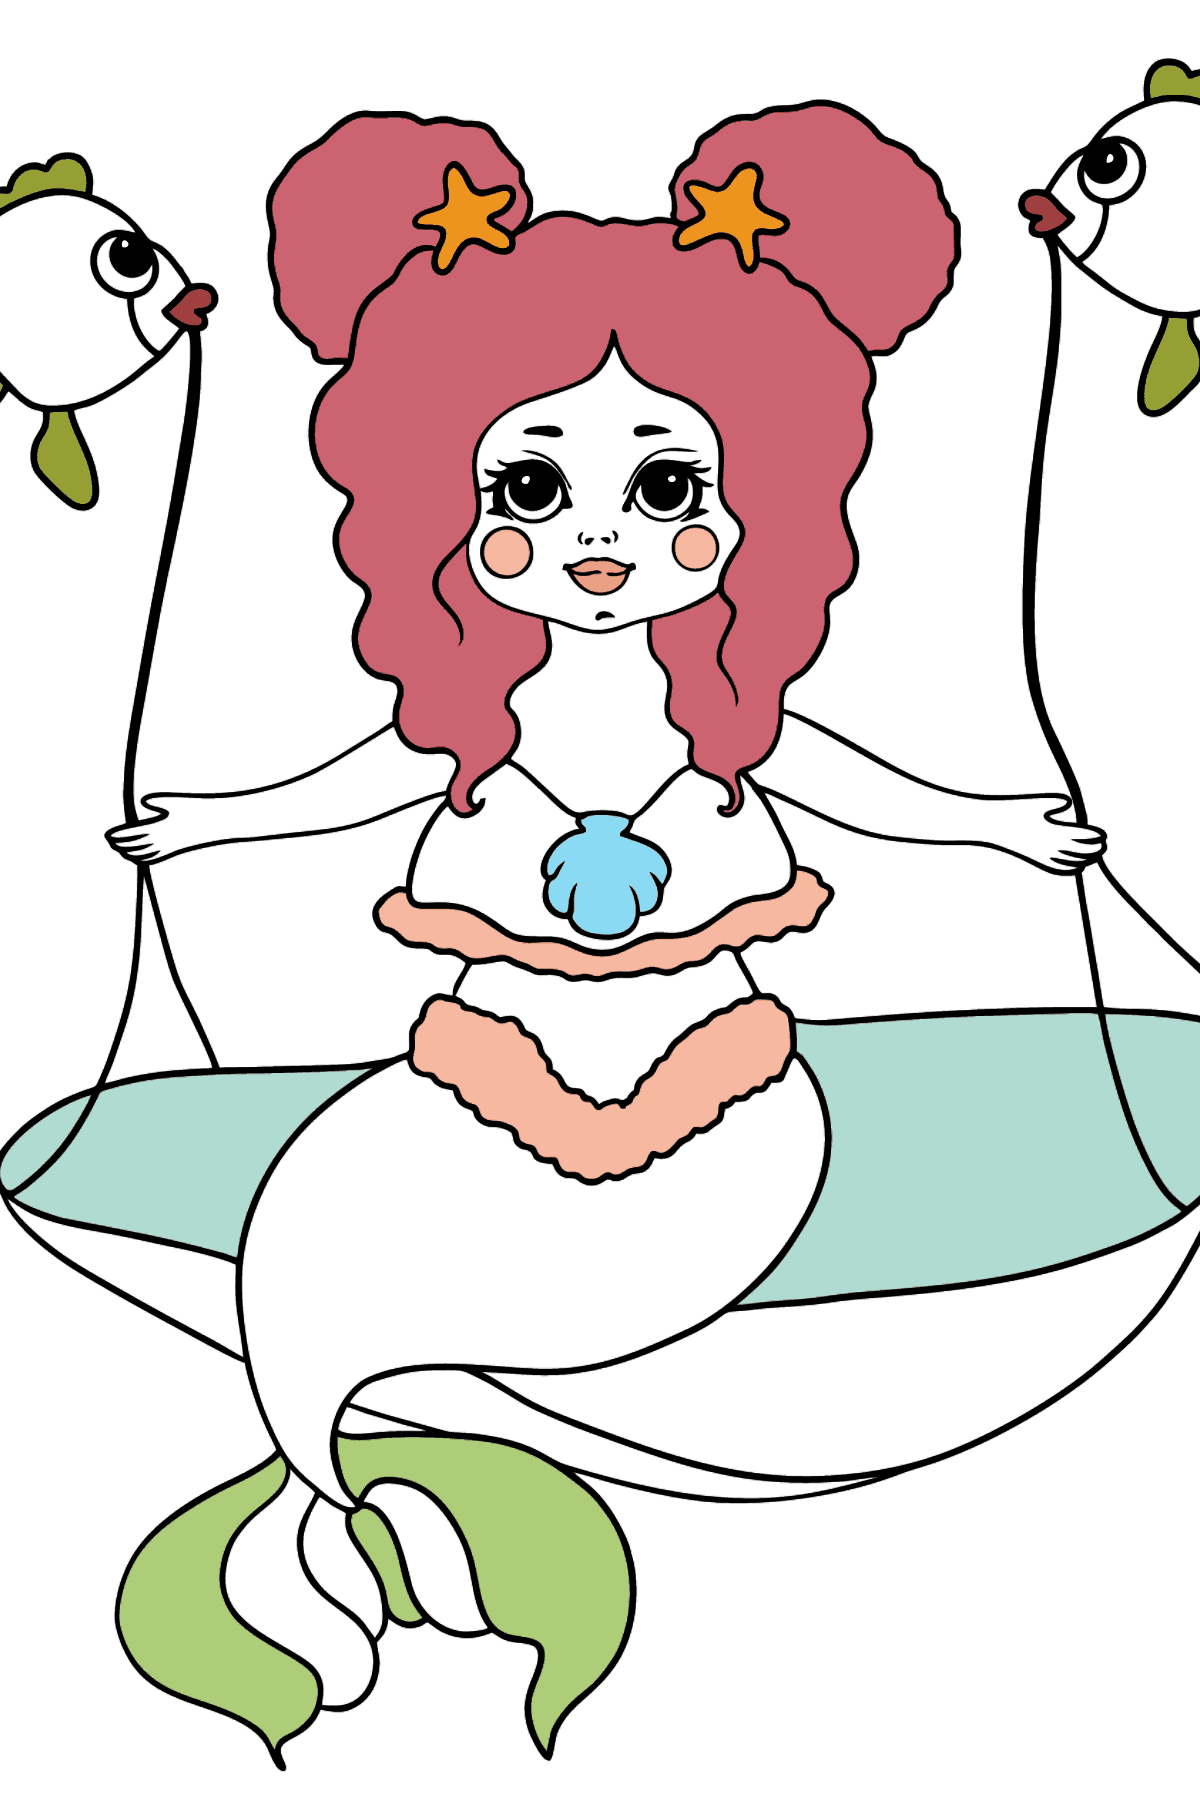 Mermaid and Two Fish coloring page - Coloring Pages for Kids